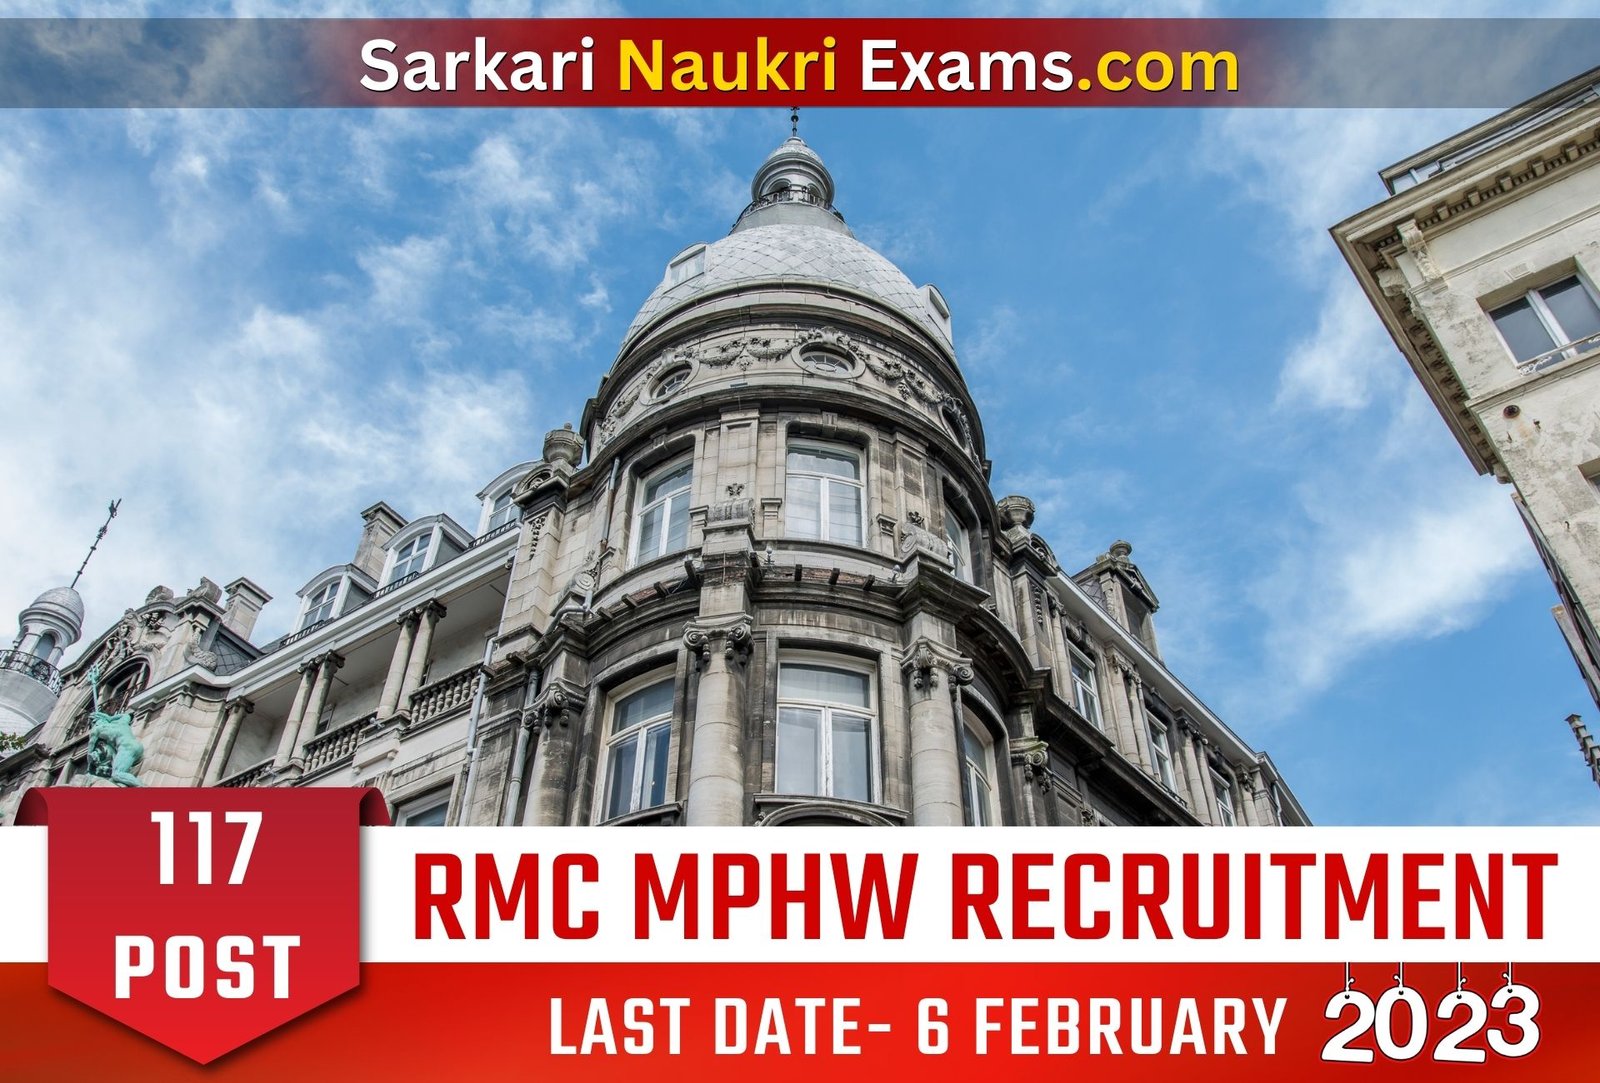 RMC MPHW Recruitment Form 2023 | Last Date 6 February